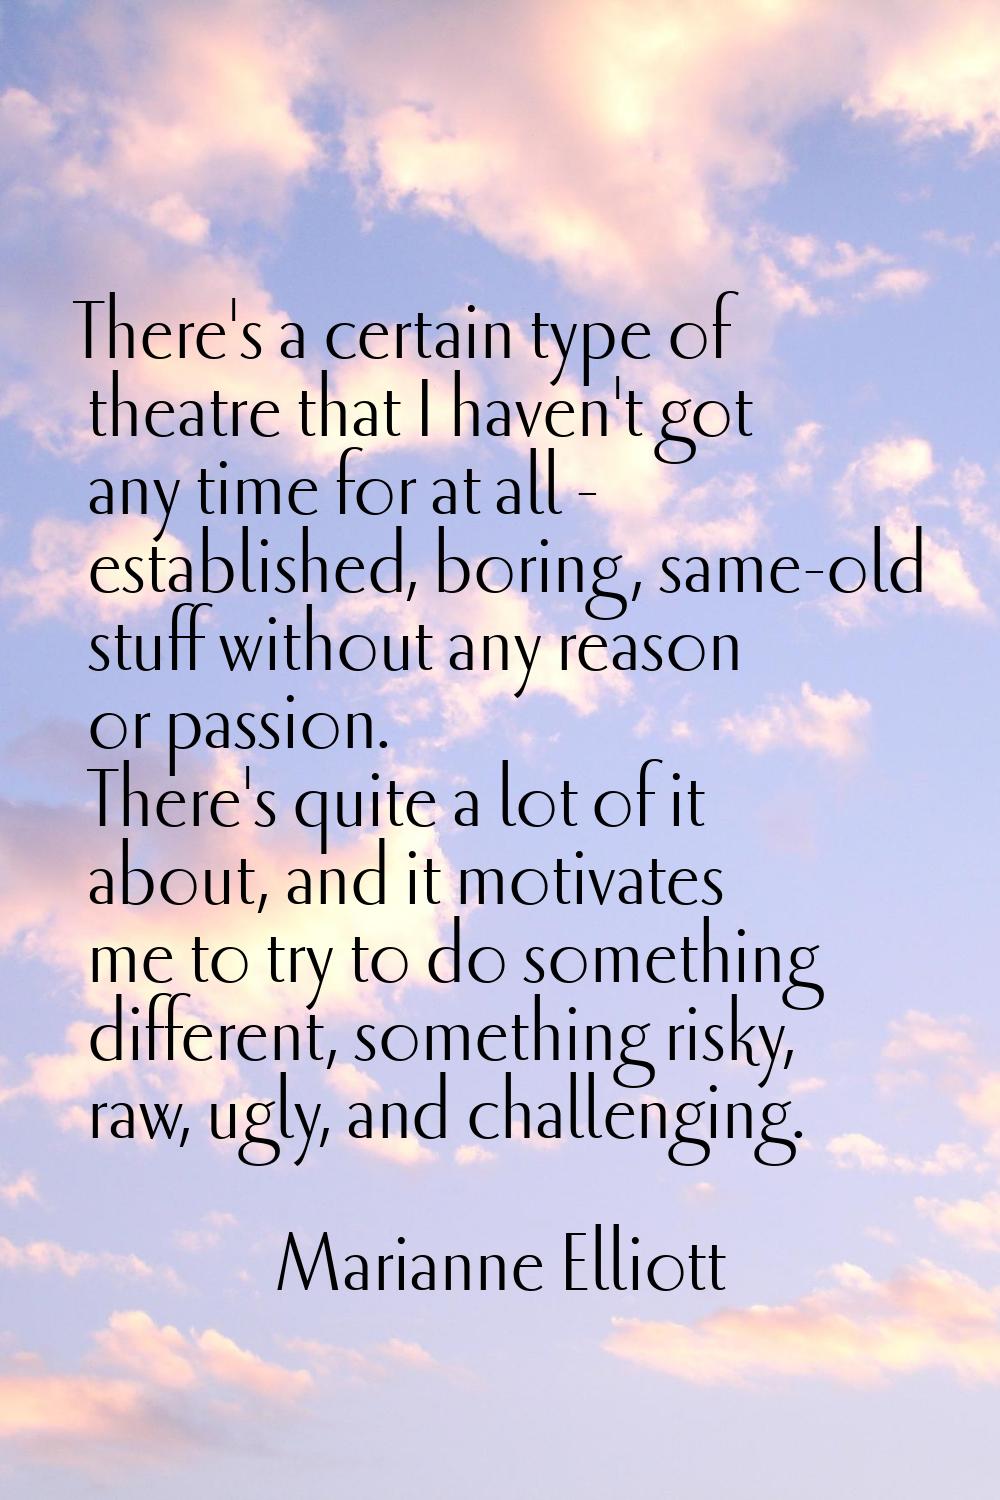 There's a certain type of theatre that I haven't got any time for at all - established, boring, sam